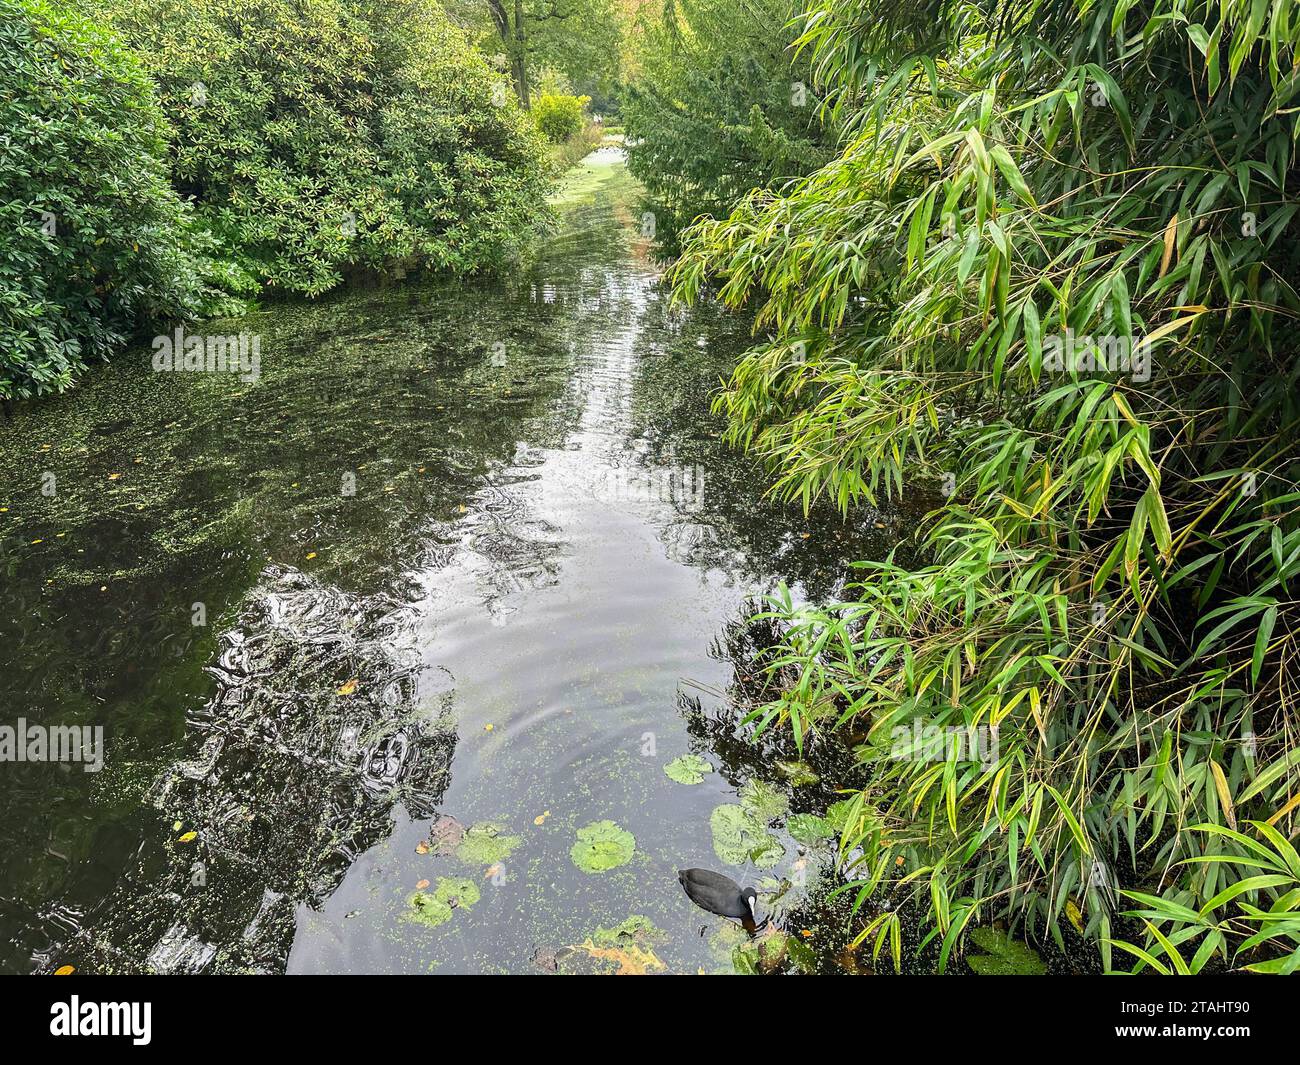 Beautiful water channel and bushes in park Stock Photo